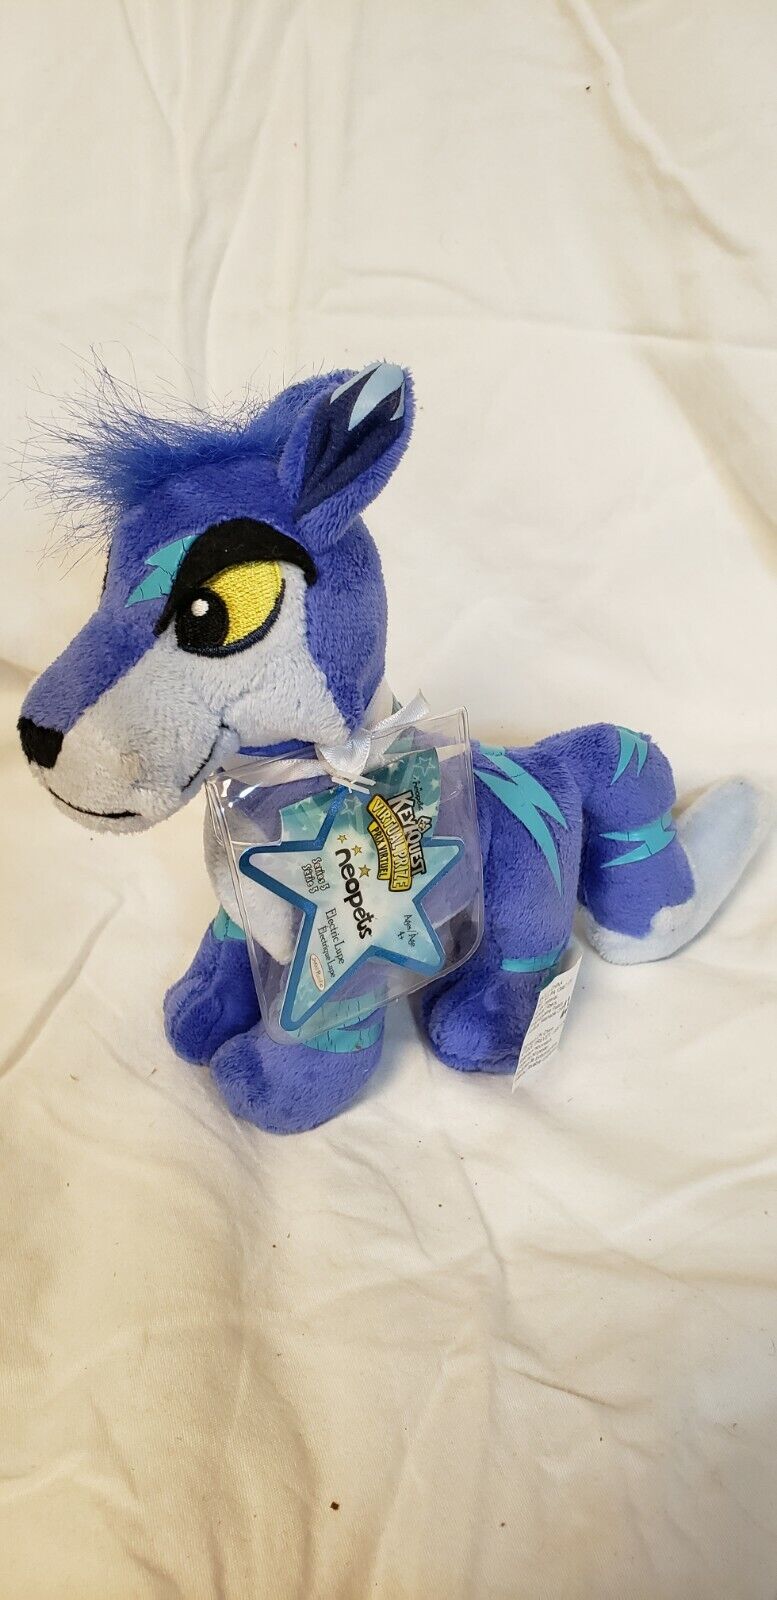 Neopets Electric Lupe Plush Toy Stuffed Animal 6.5" Keyquest Ser 5 New W/code!!